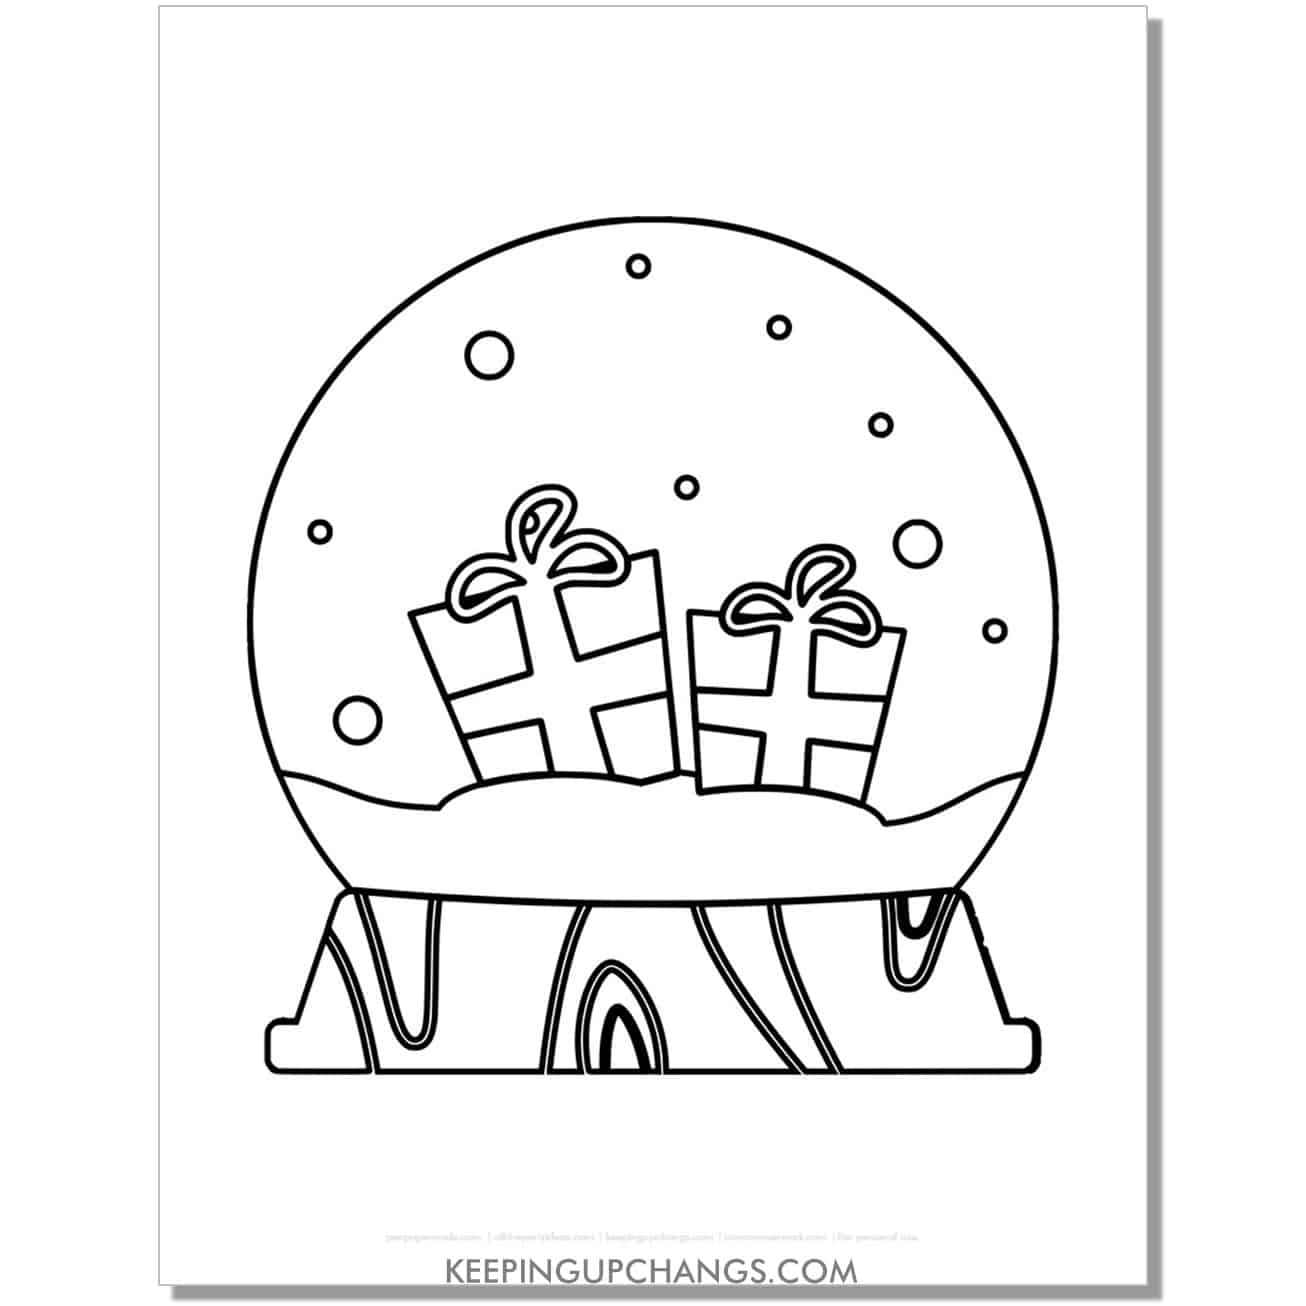 free preschool gifts, presents snow globe coloring page.